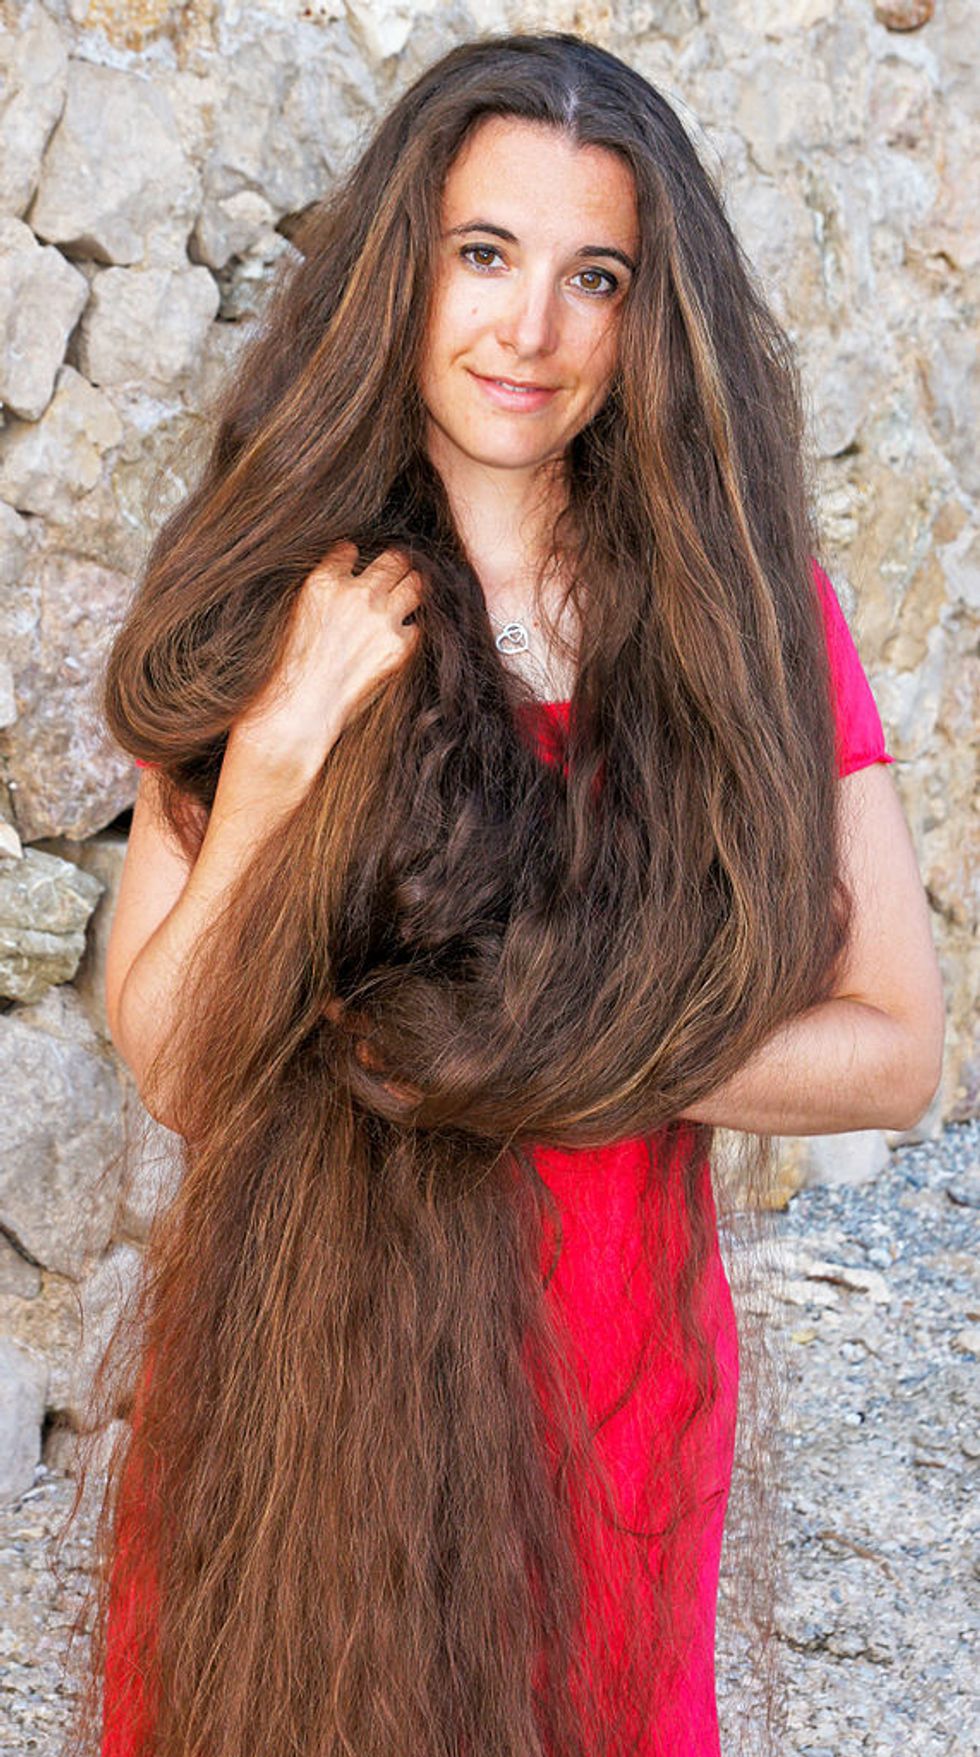 What It's Like To Have Long Hair